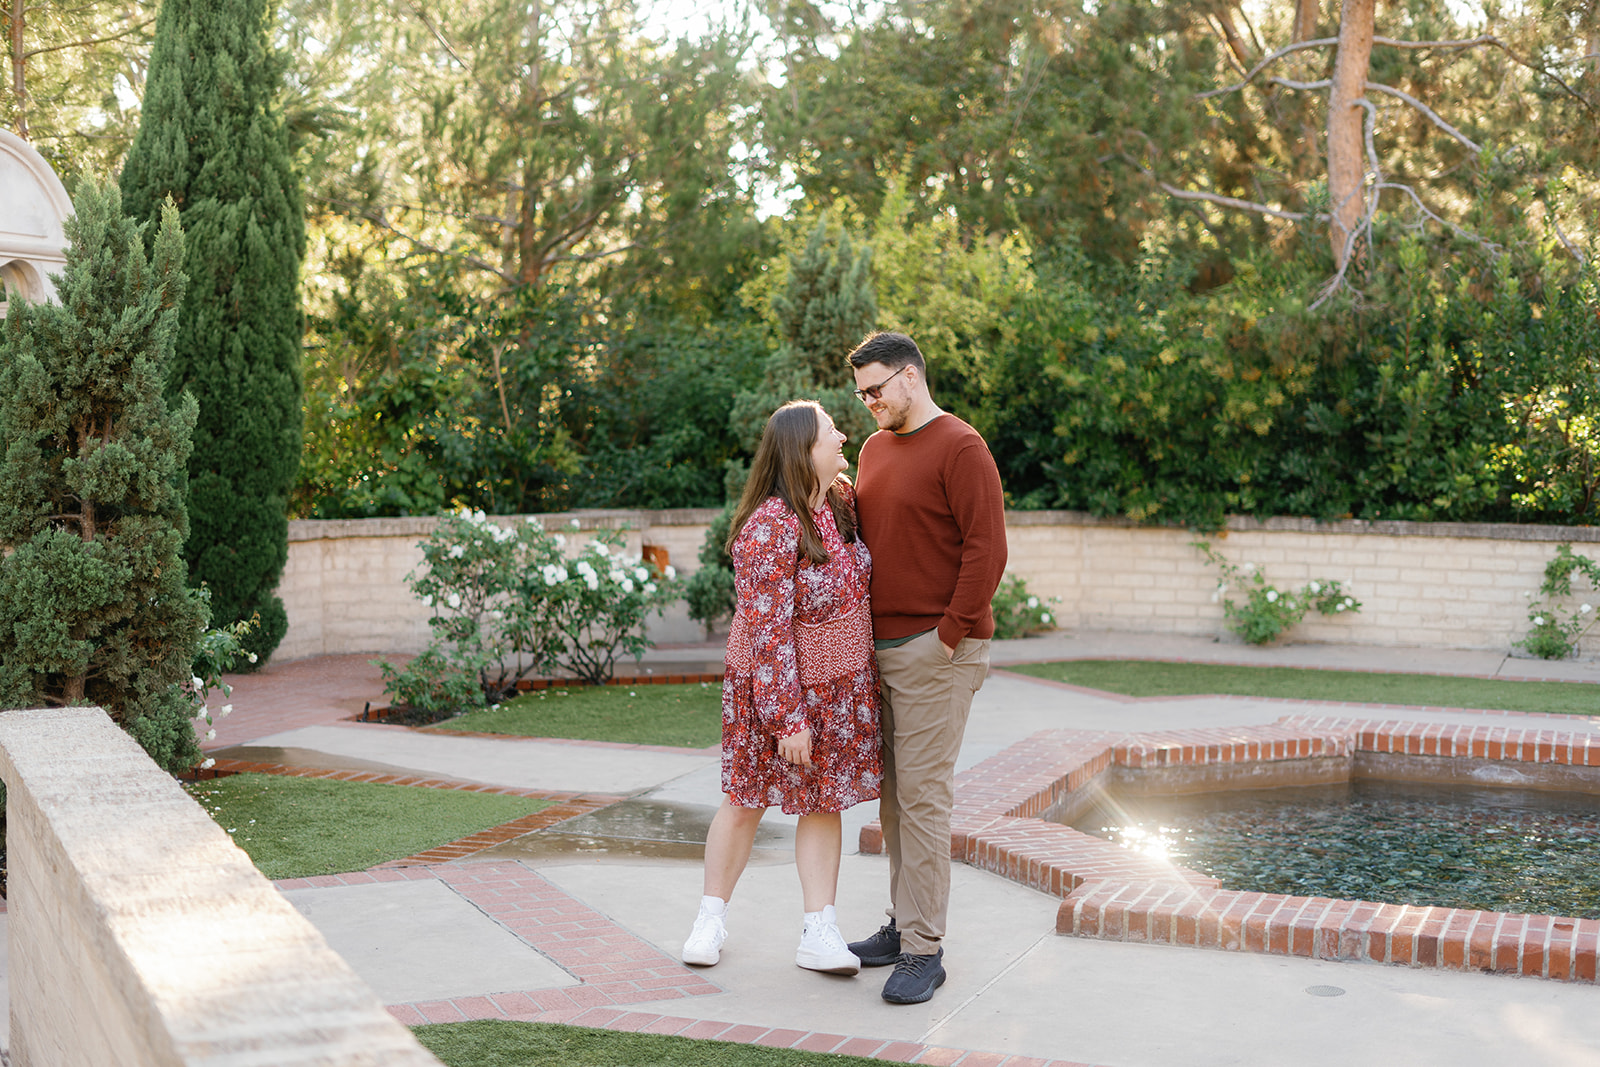 balboa park engagement photos; a couple taking their engagement photos in balboa park, they are smiling at each other.